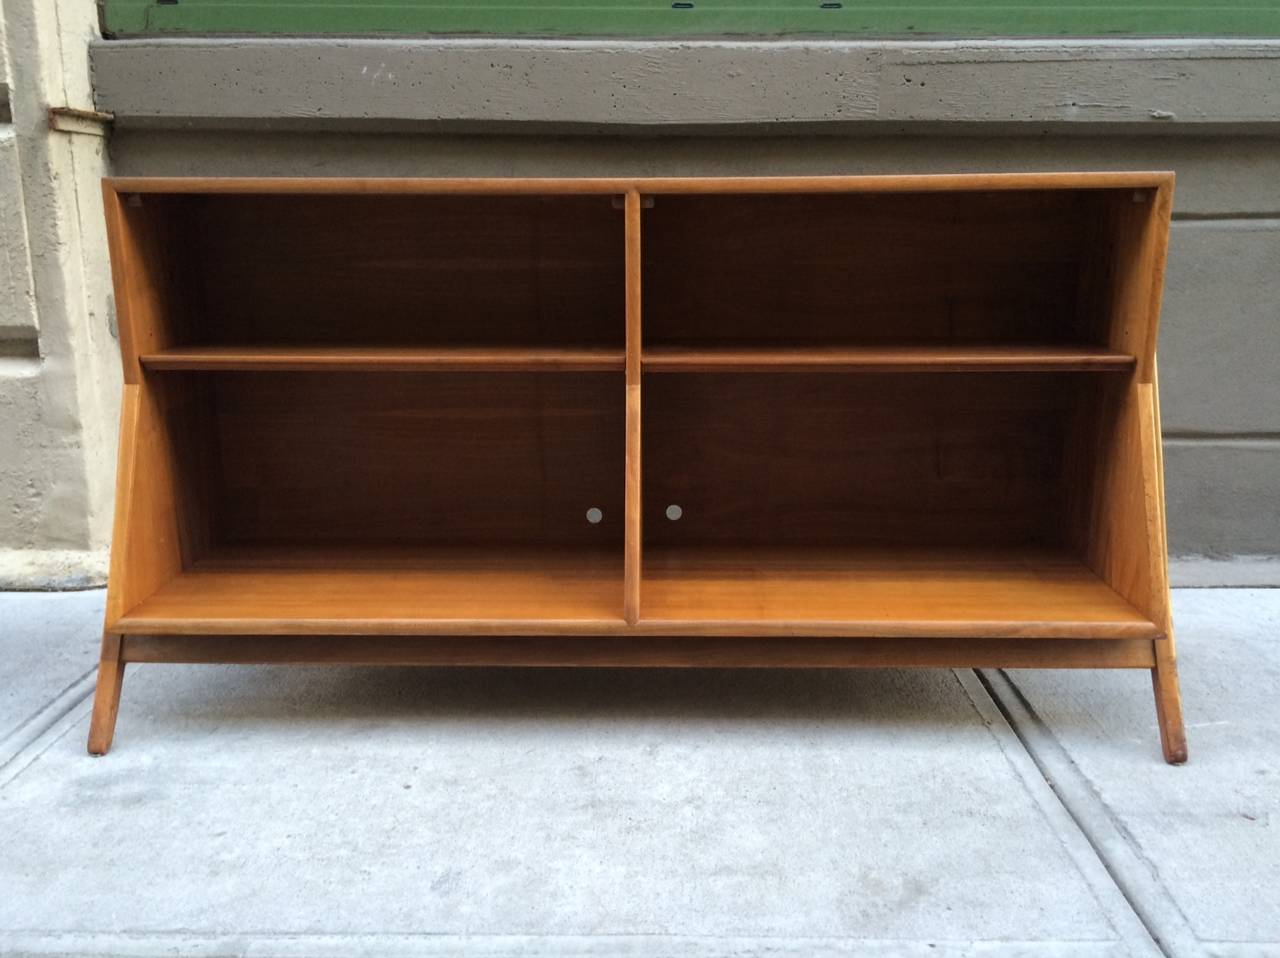 Open bookcase for Drexel by Stewart McDougall and Kipp Stewart. Item is walnut with sculptural sides.
The depth of the bottom is 16.5